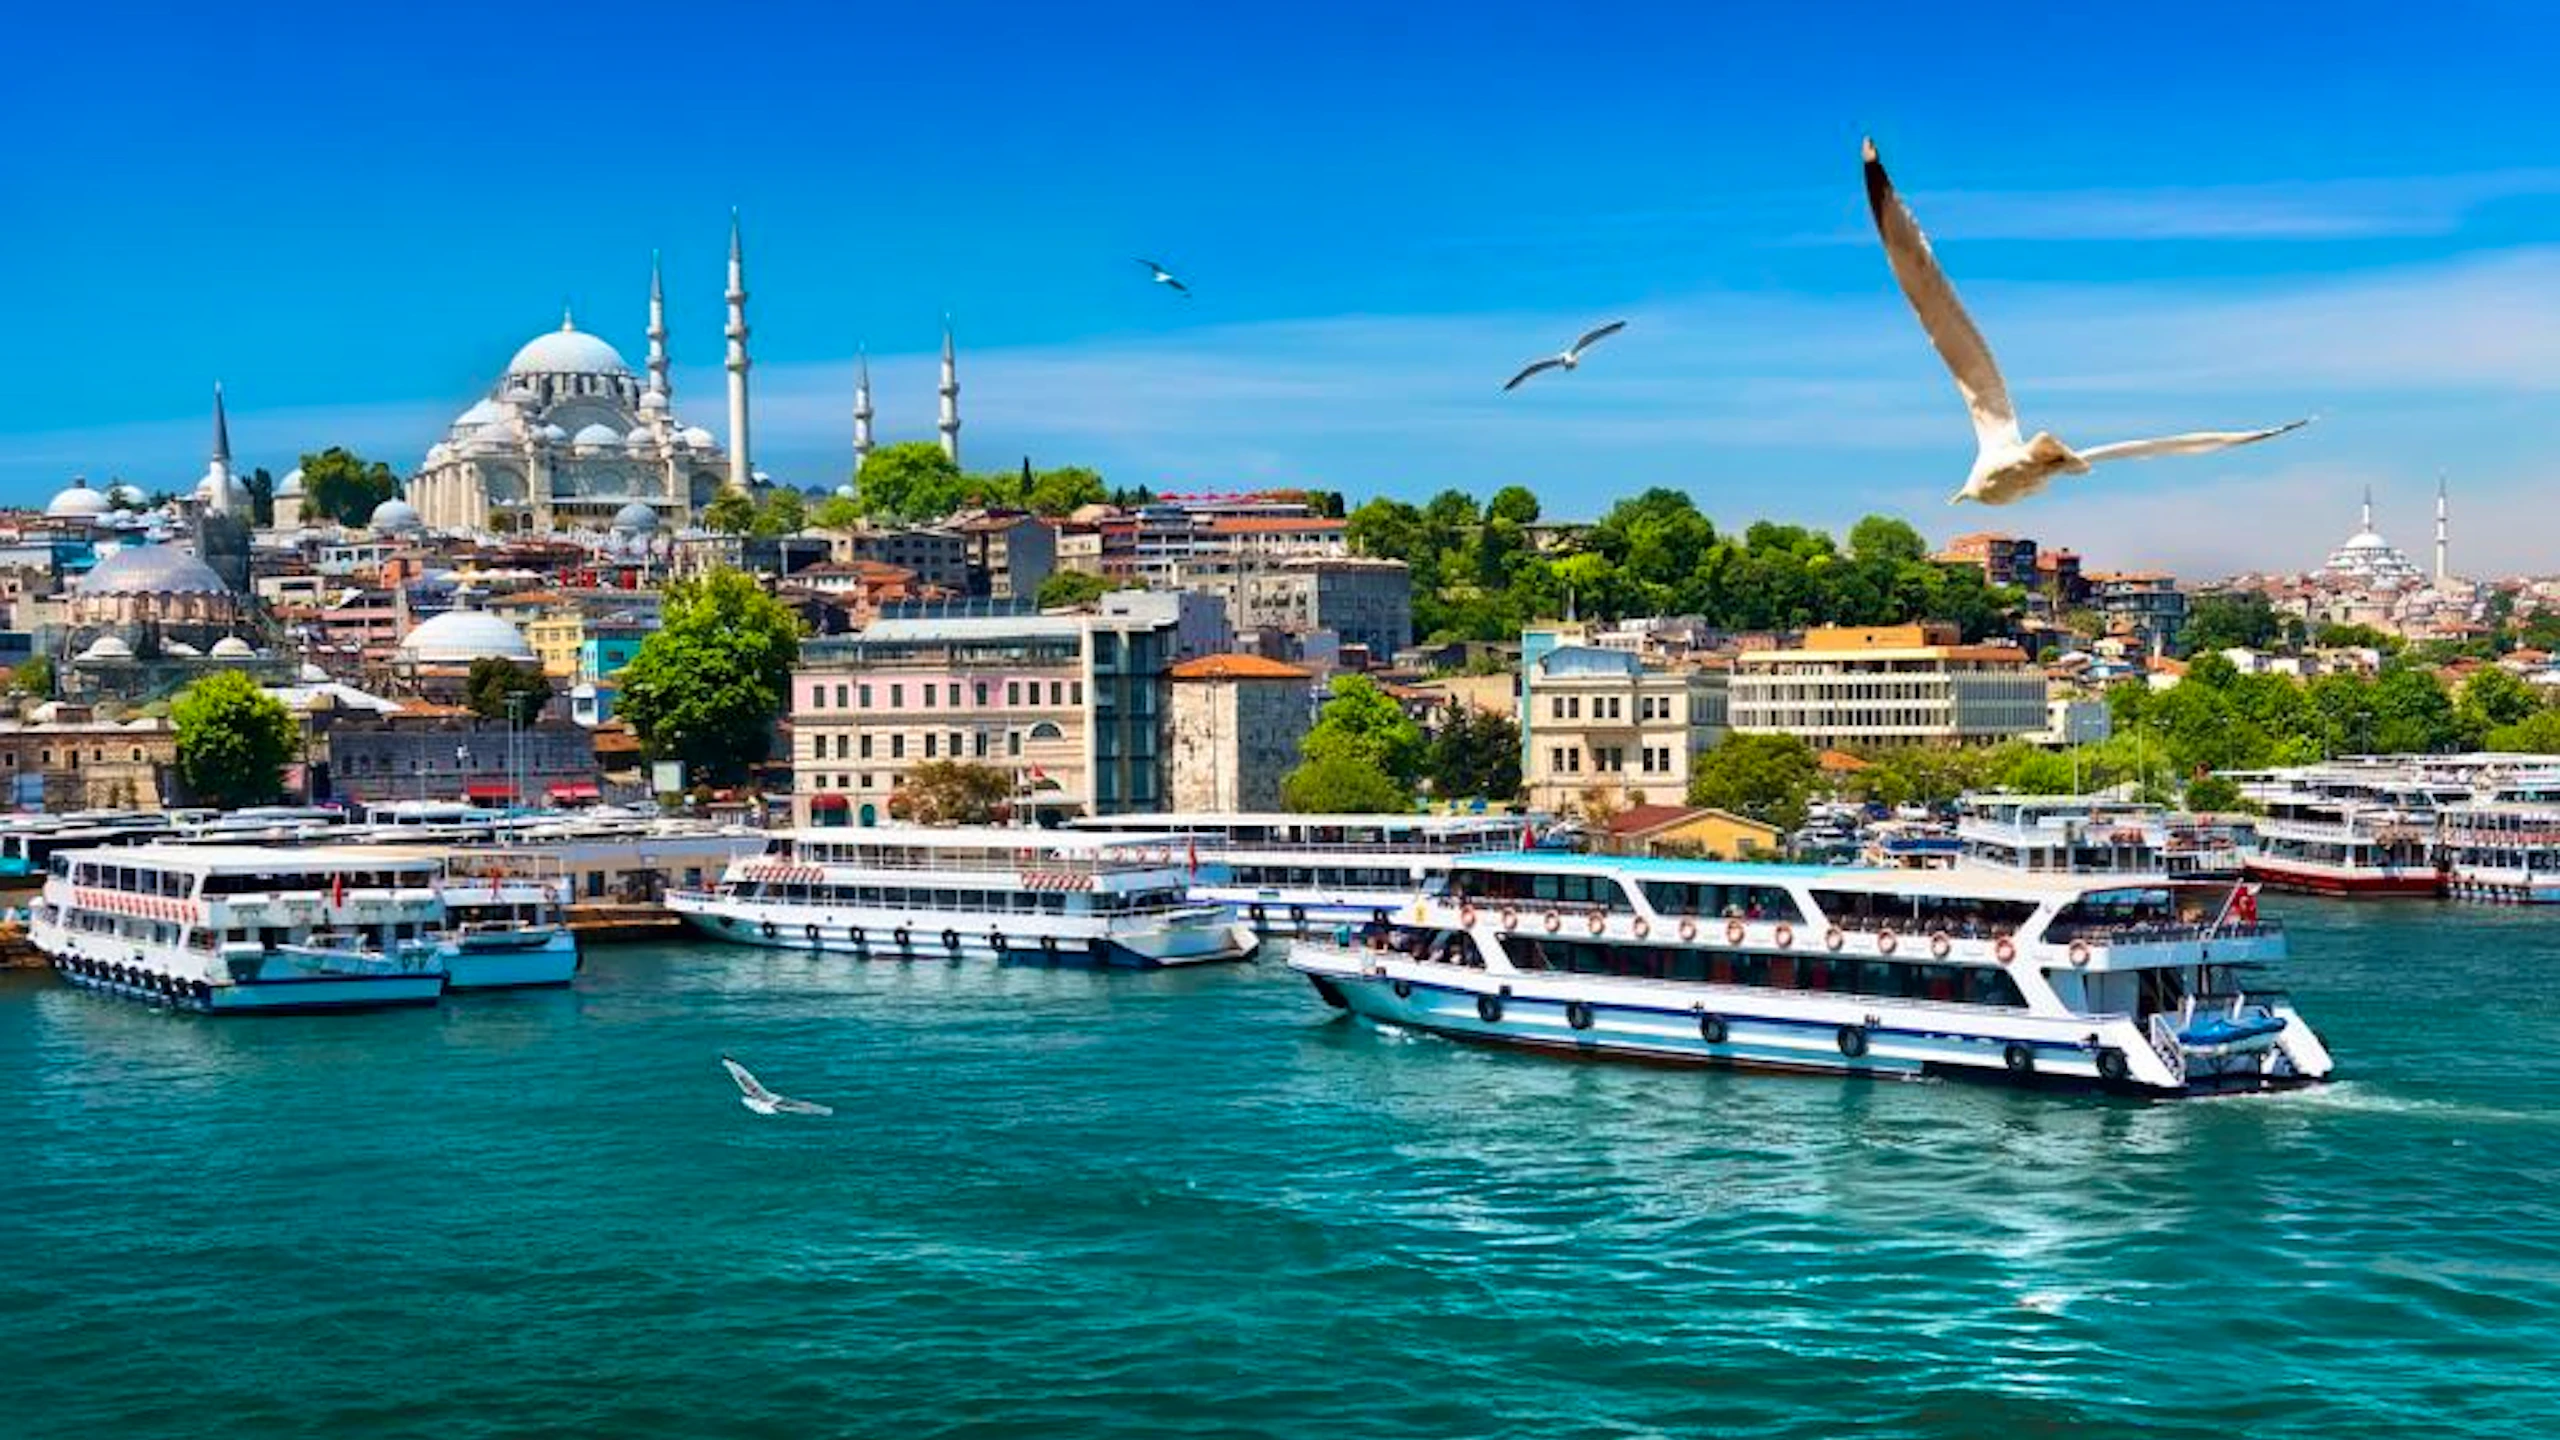 Istanbul Bosphorus Cruise Tour, Bus and Cable Car Ride Location